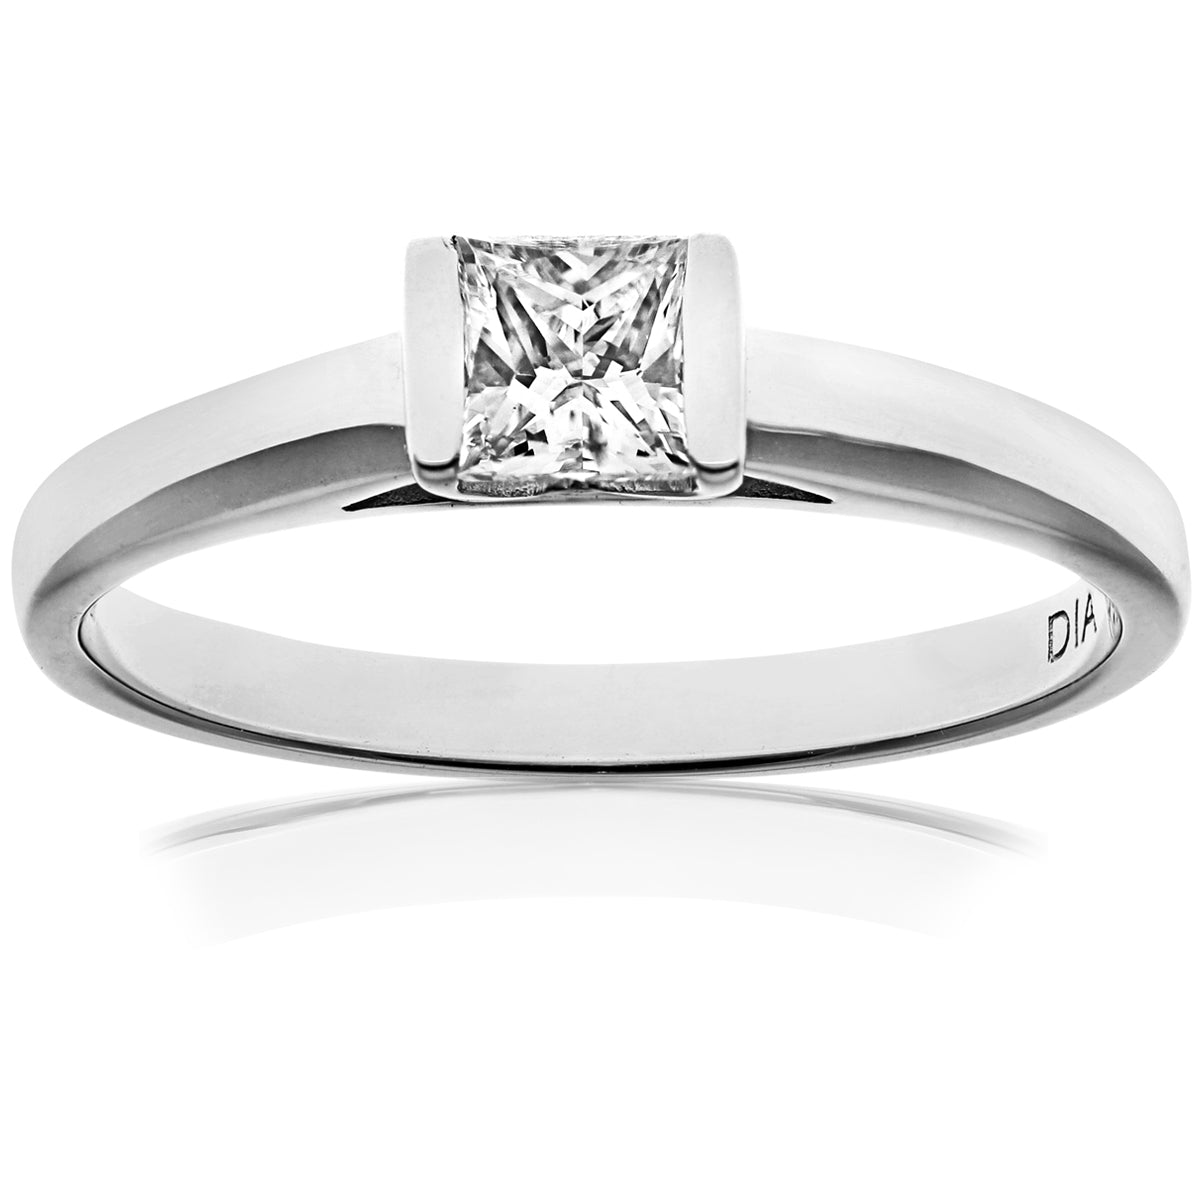 18ct White Gold  Princess 1/3ct Diamond Channel Bar Solitaire Ring - PR0AXL915118KW